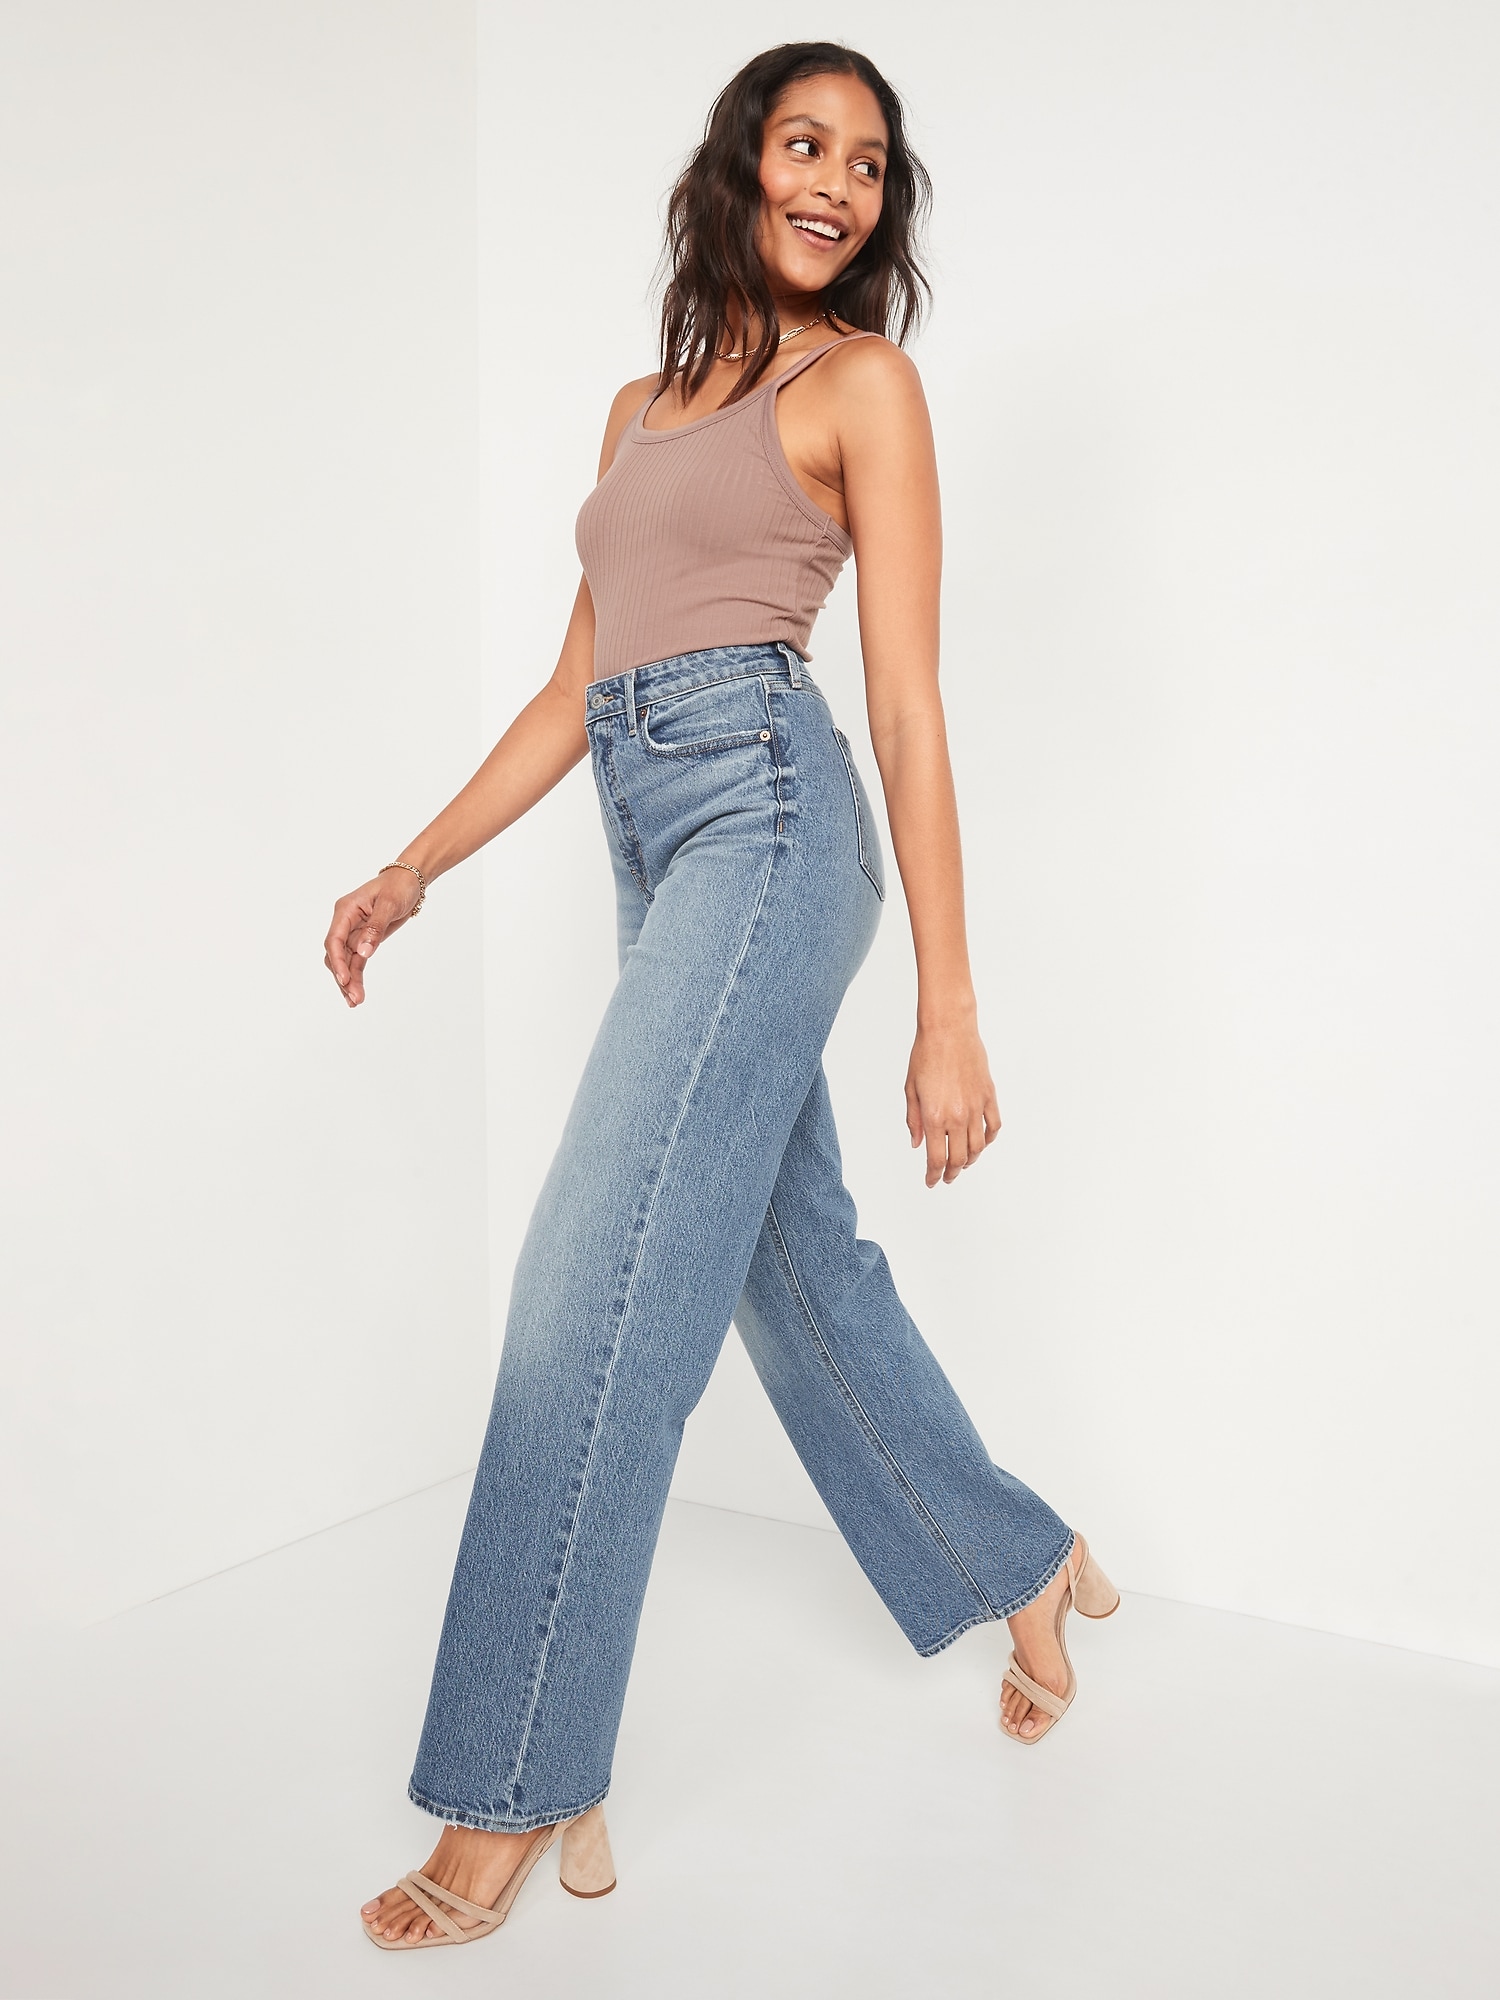 What to wear with high waisted jeans (Complete guide for women)-saigonsouth.com.vn